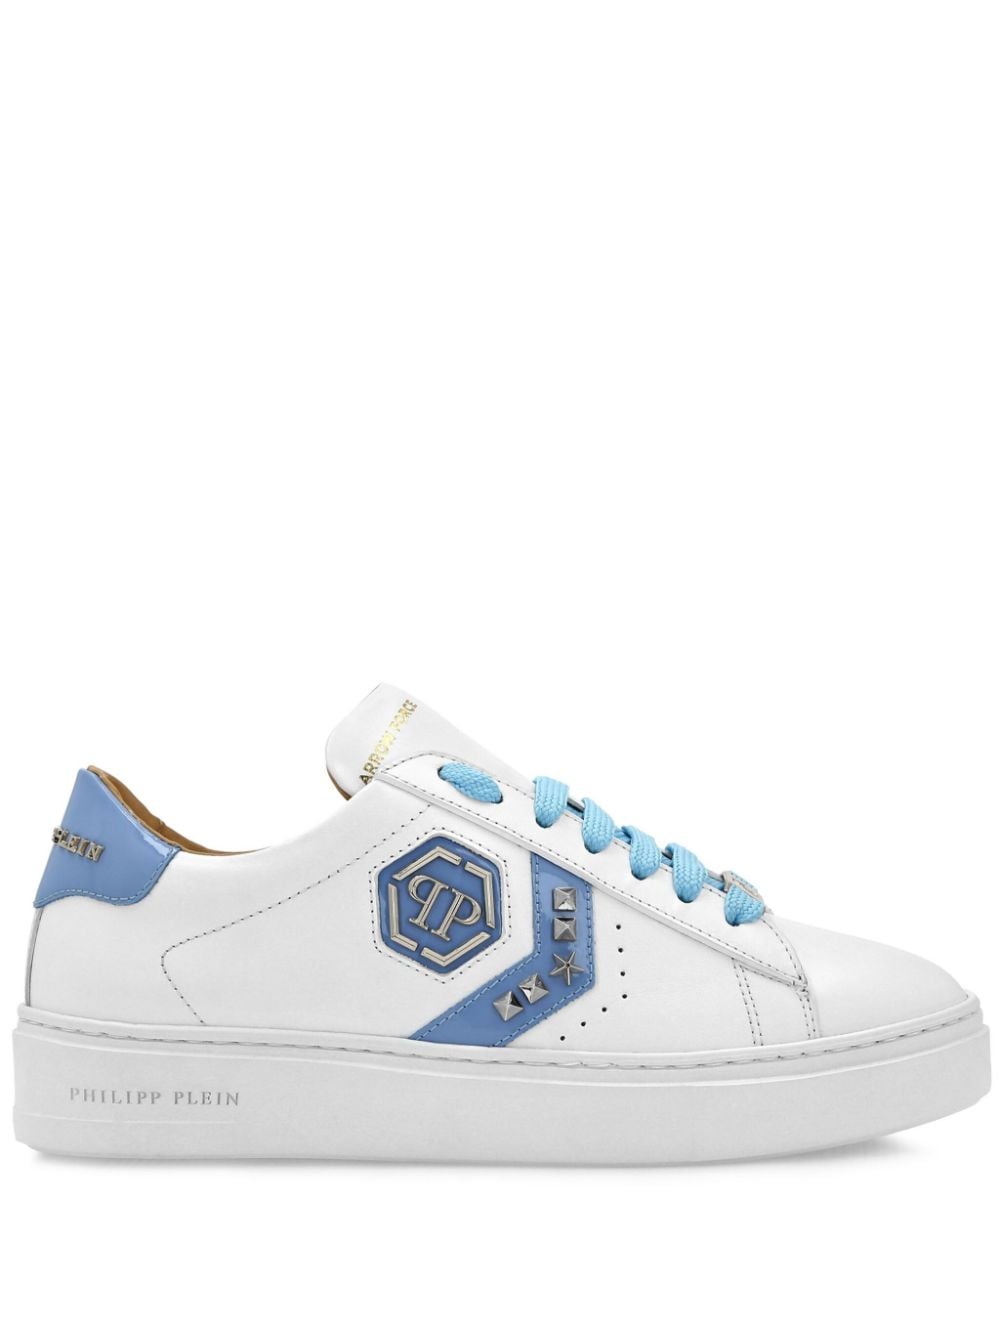 Philipp Plein Arrow Force Leather Sneakers In White